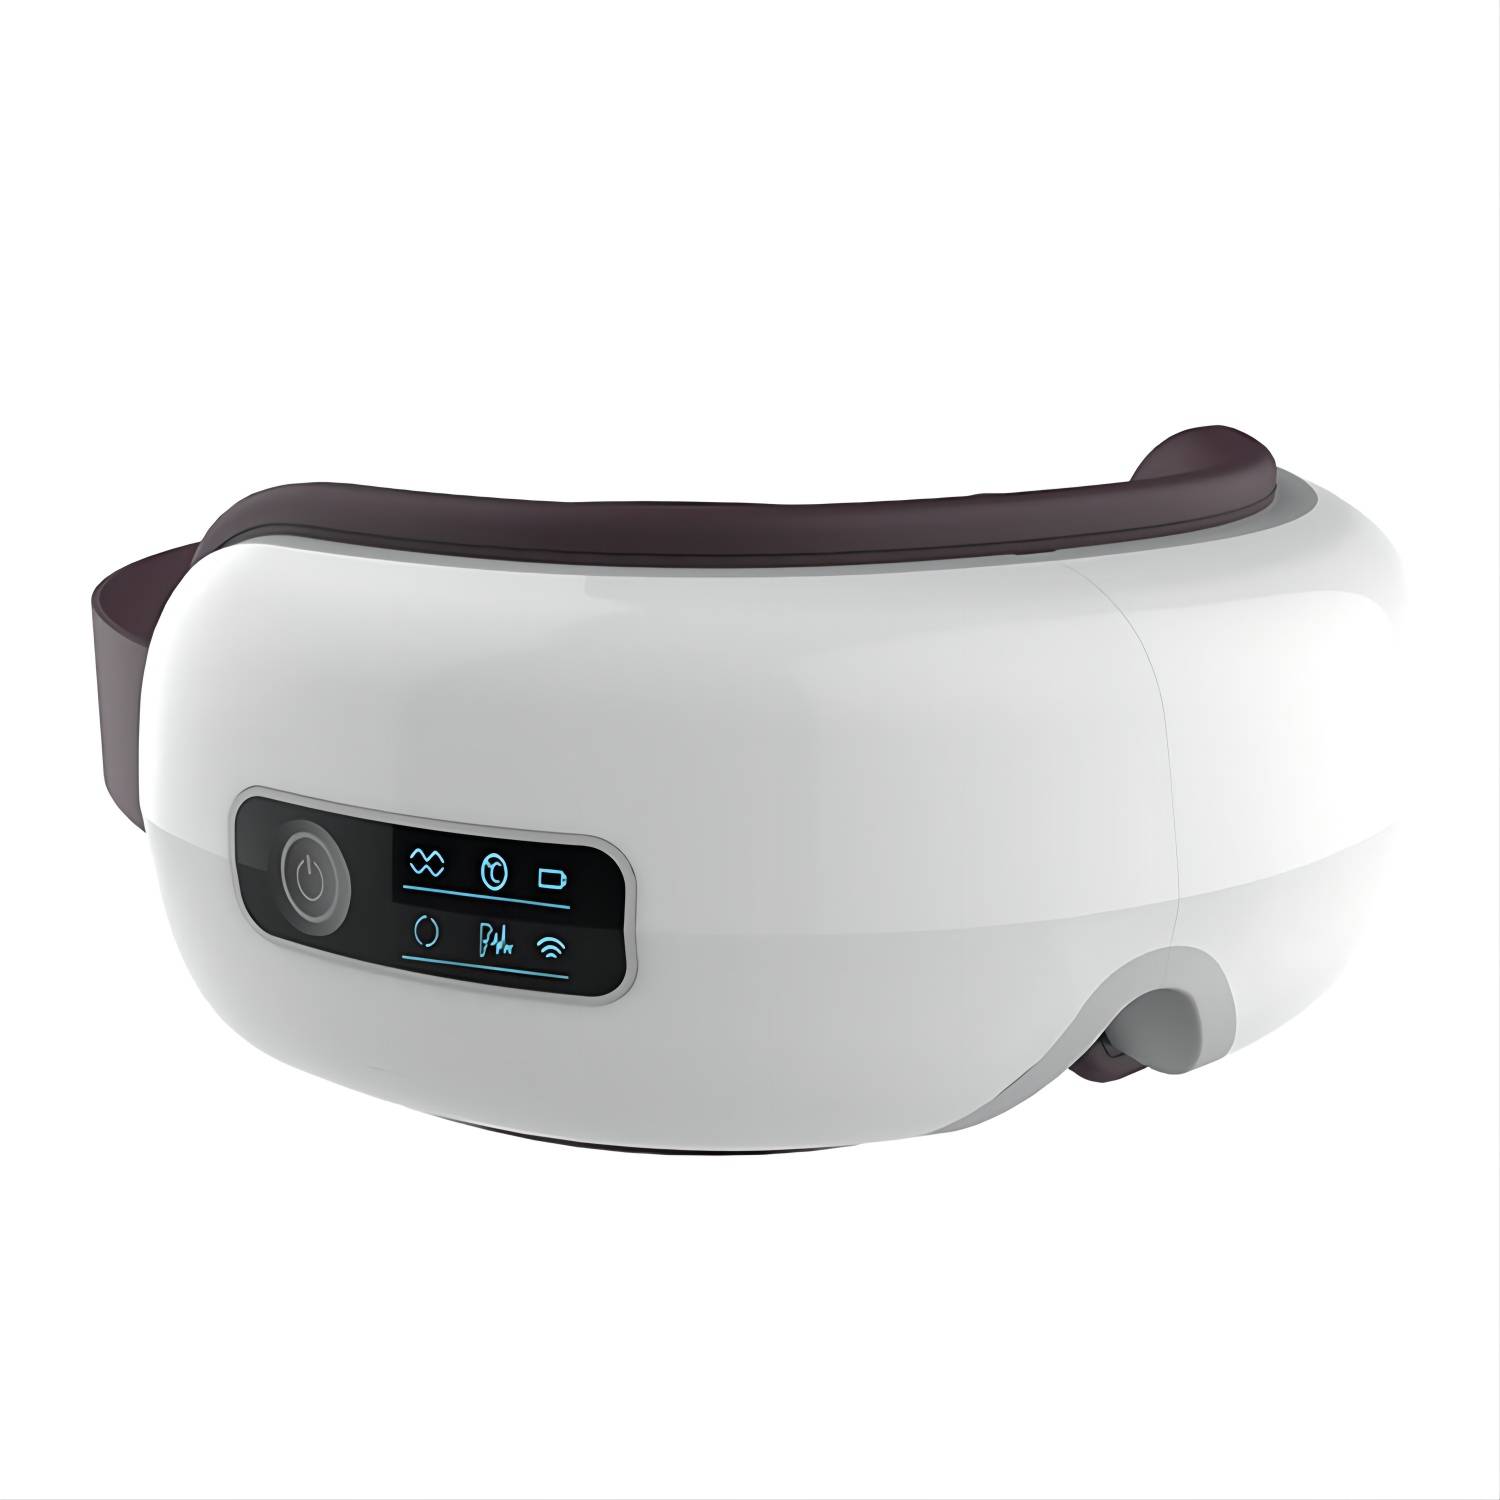 F-709C Electric Relax Vibrating Eye Massager